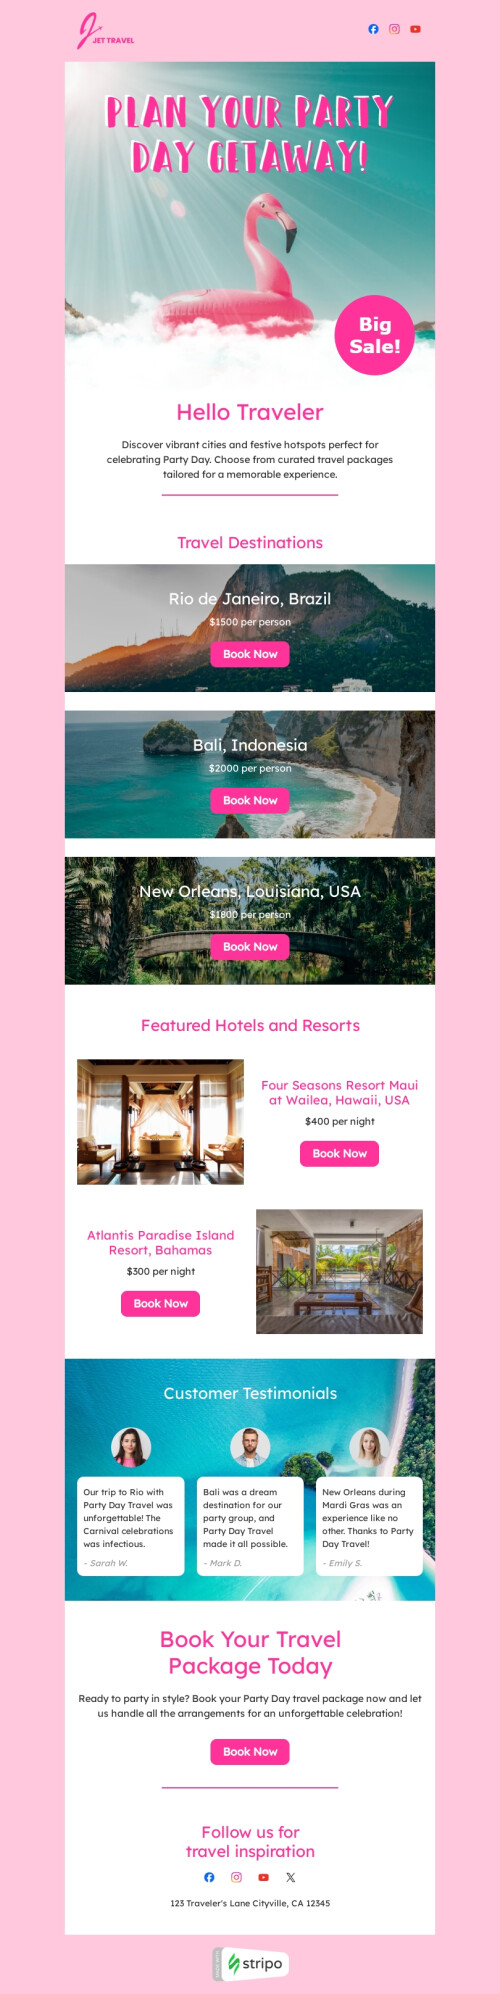 Party Day email template "Plan your party" for travel industry mobile view